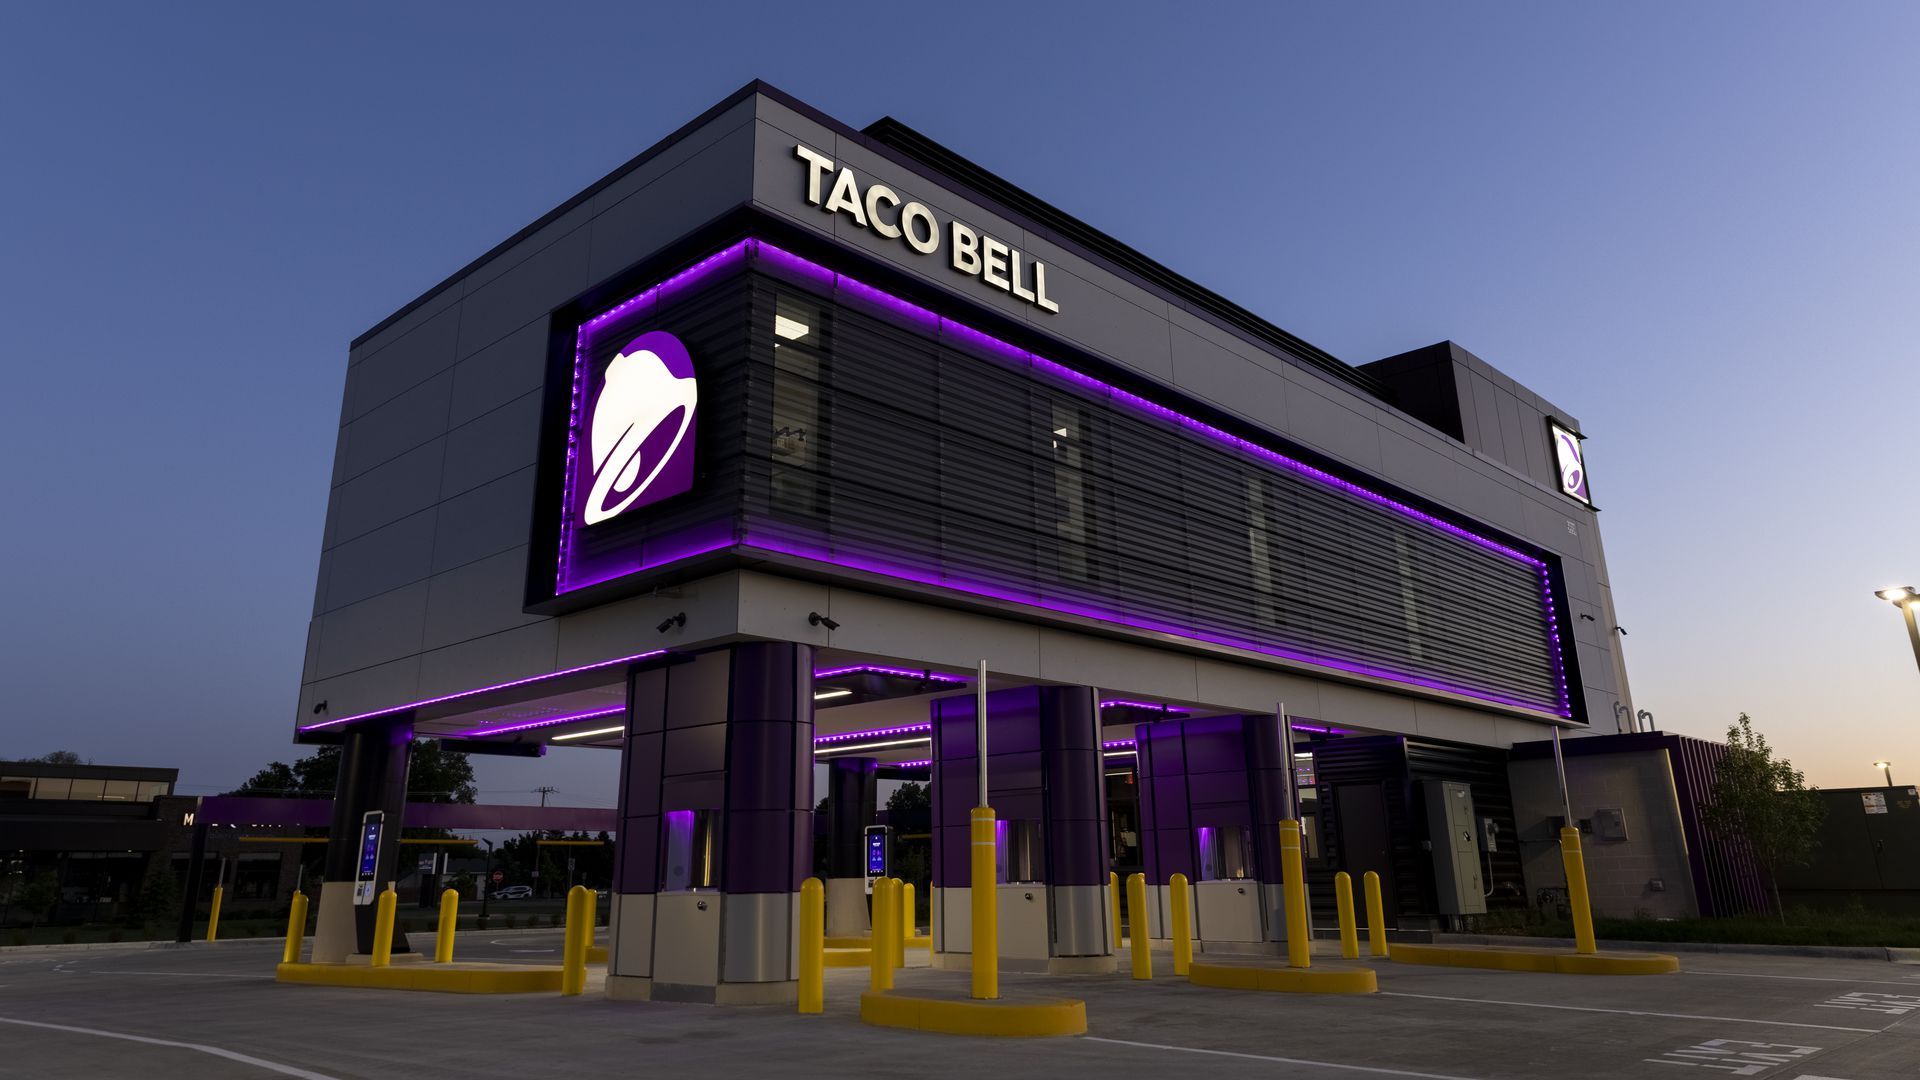 Taco Bell's new "Defy" concept.